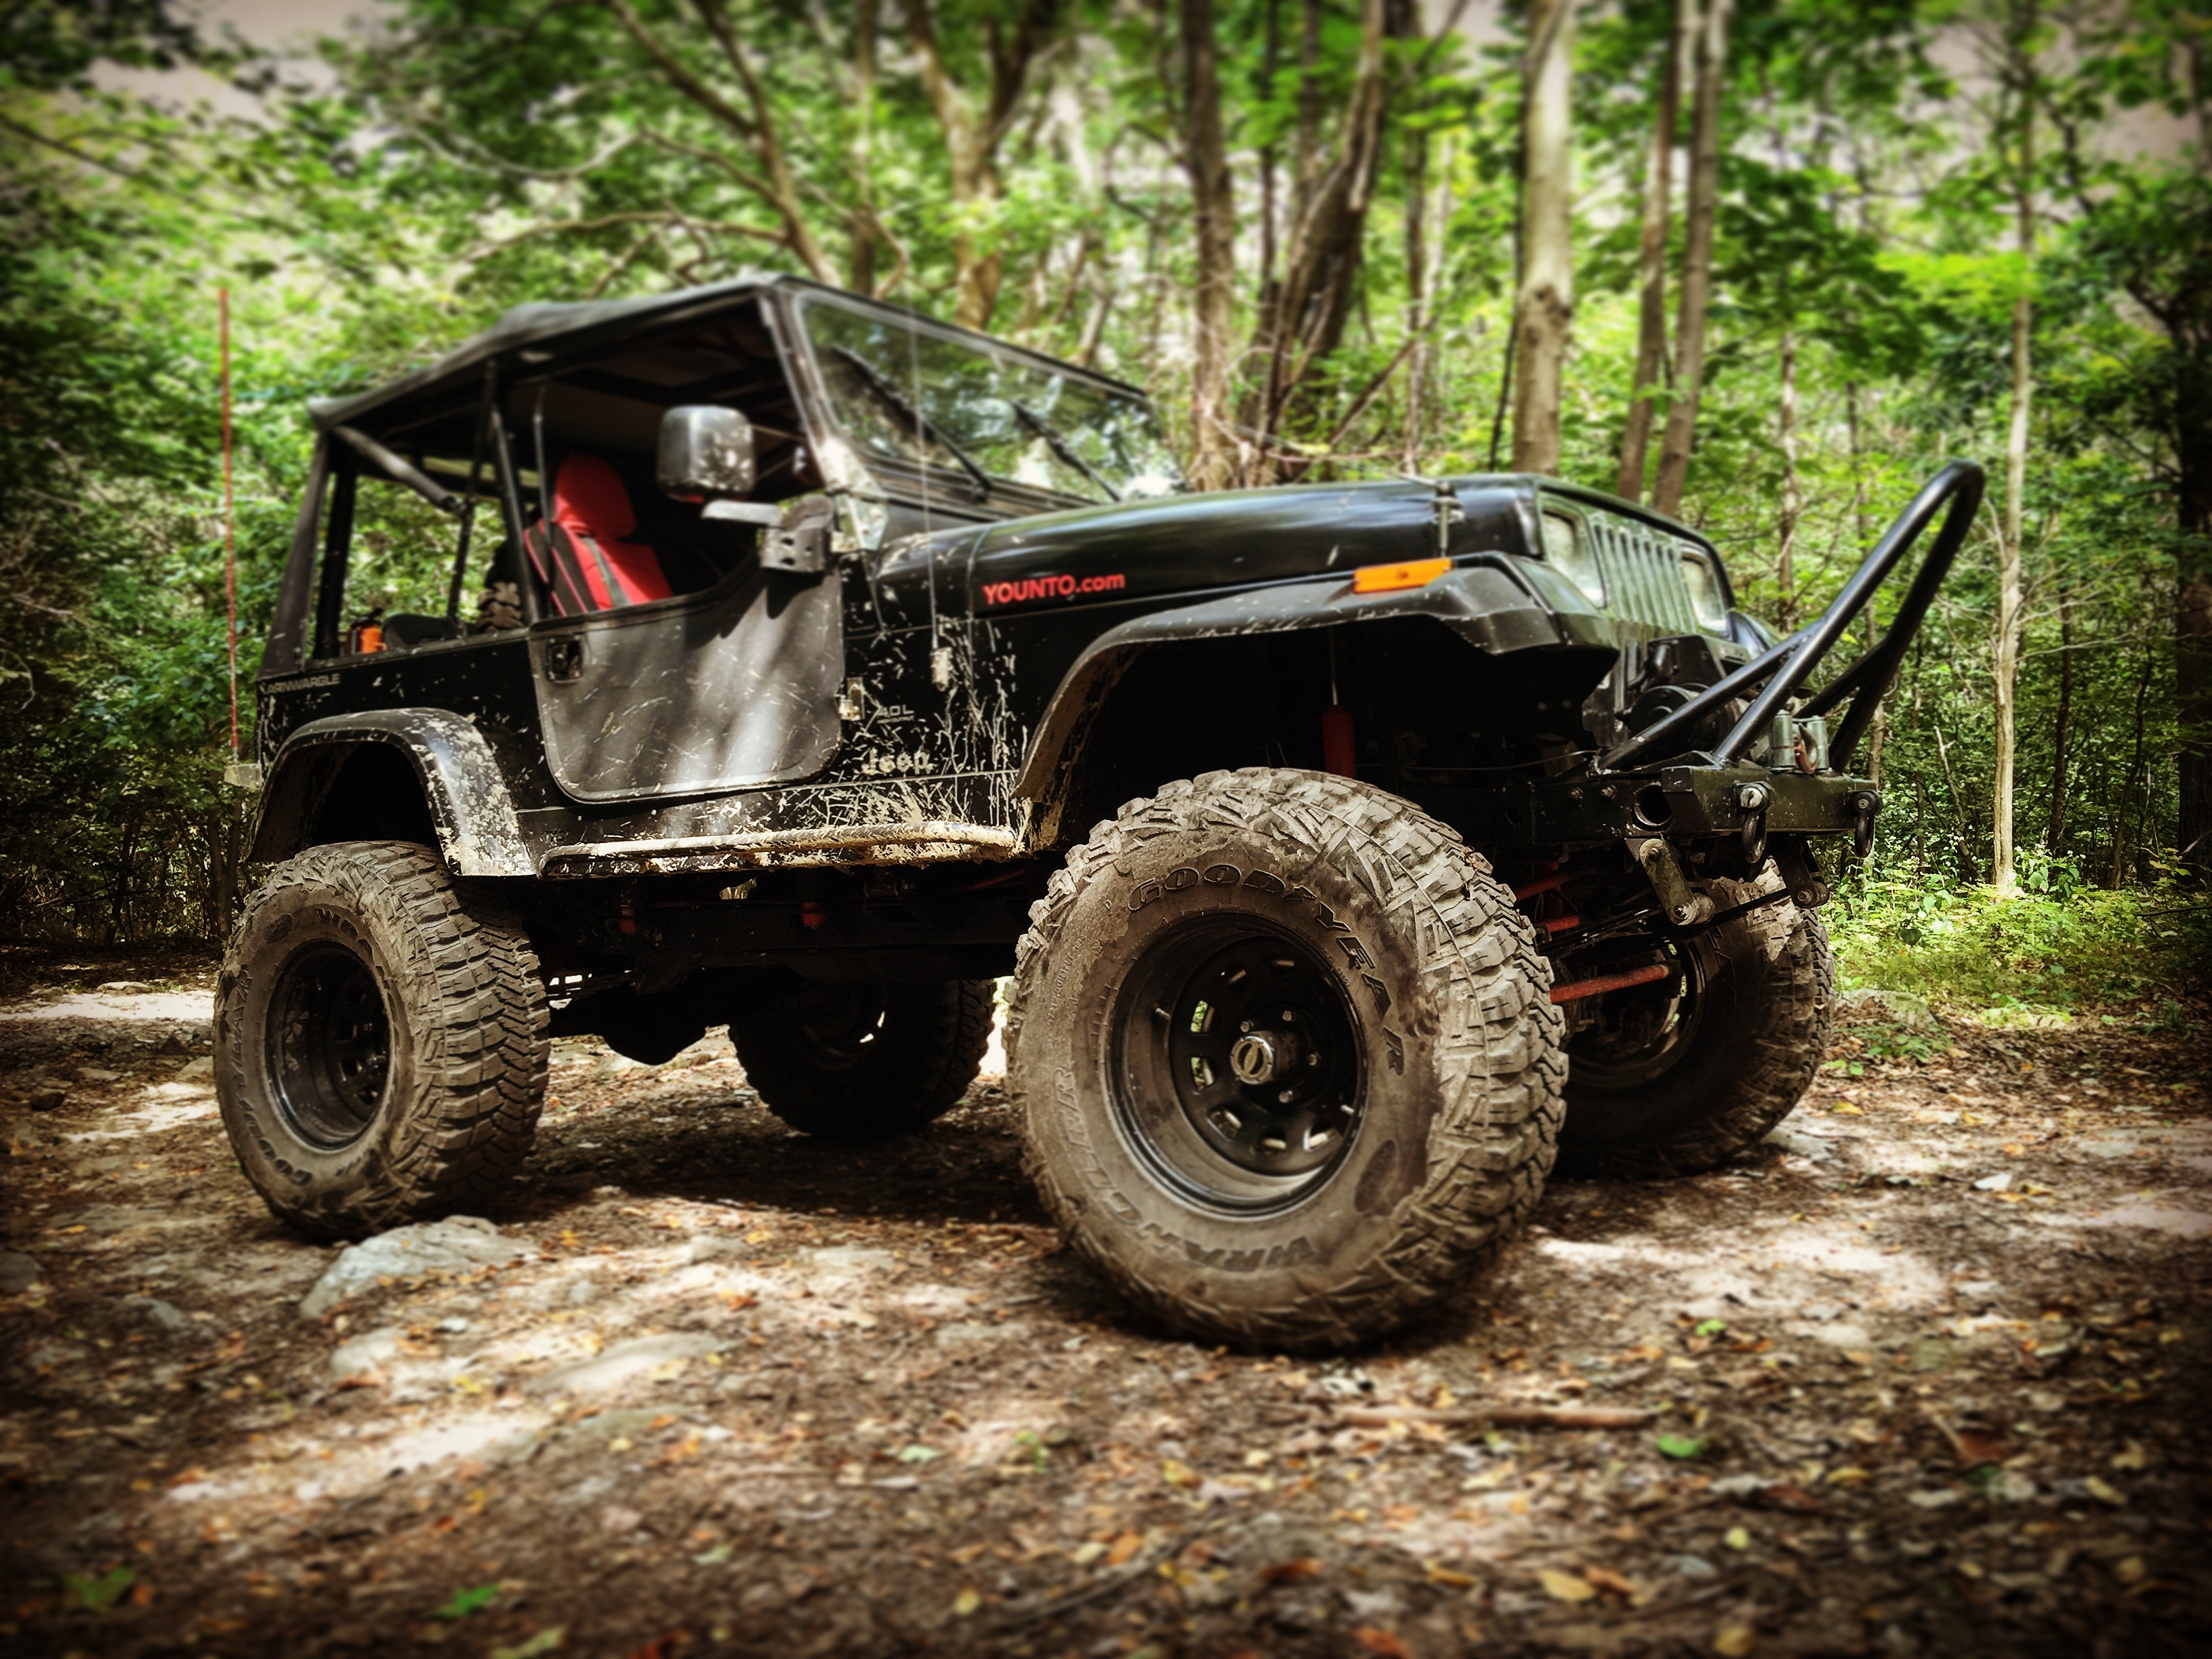 OCD Offroad Shop for Jeep Repair and Modification in Northern Virginia